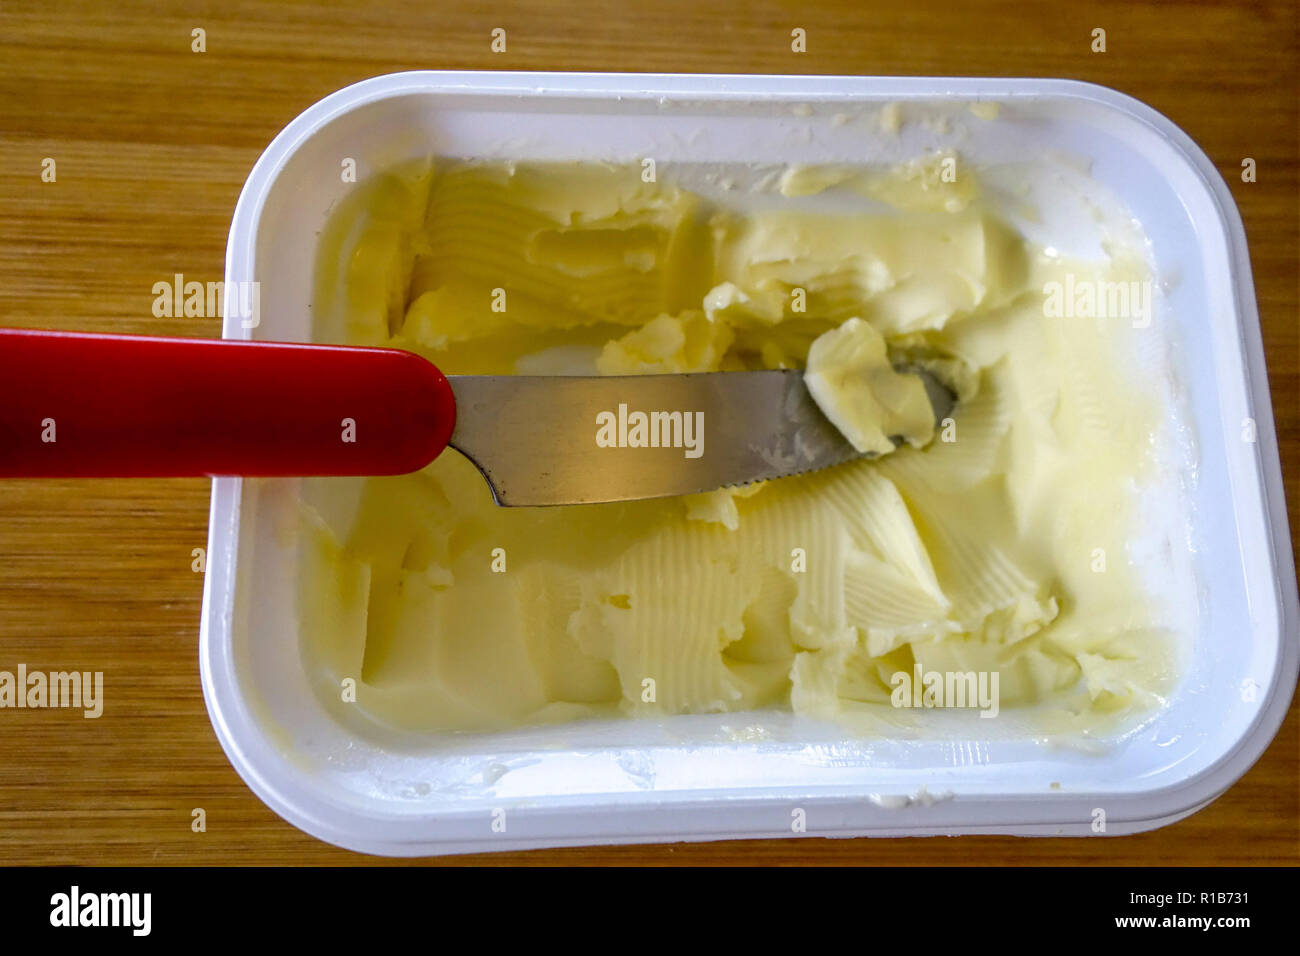 Knife in a carton of Butter Stock Photo